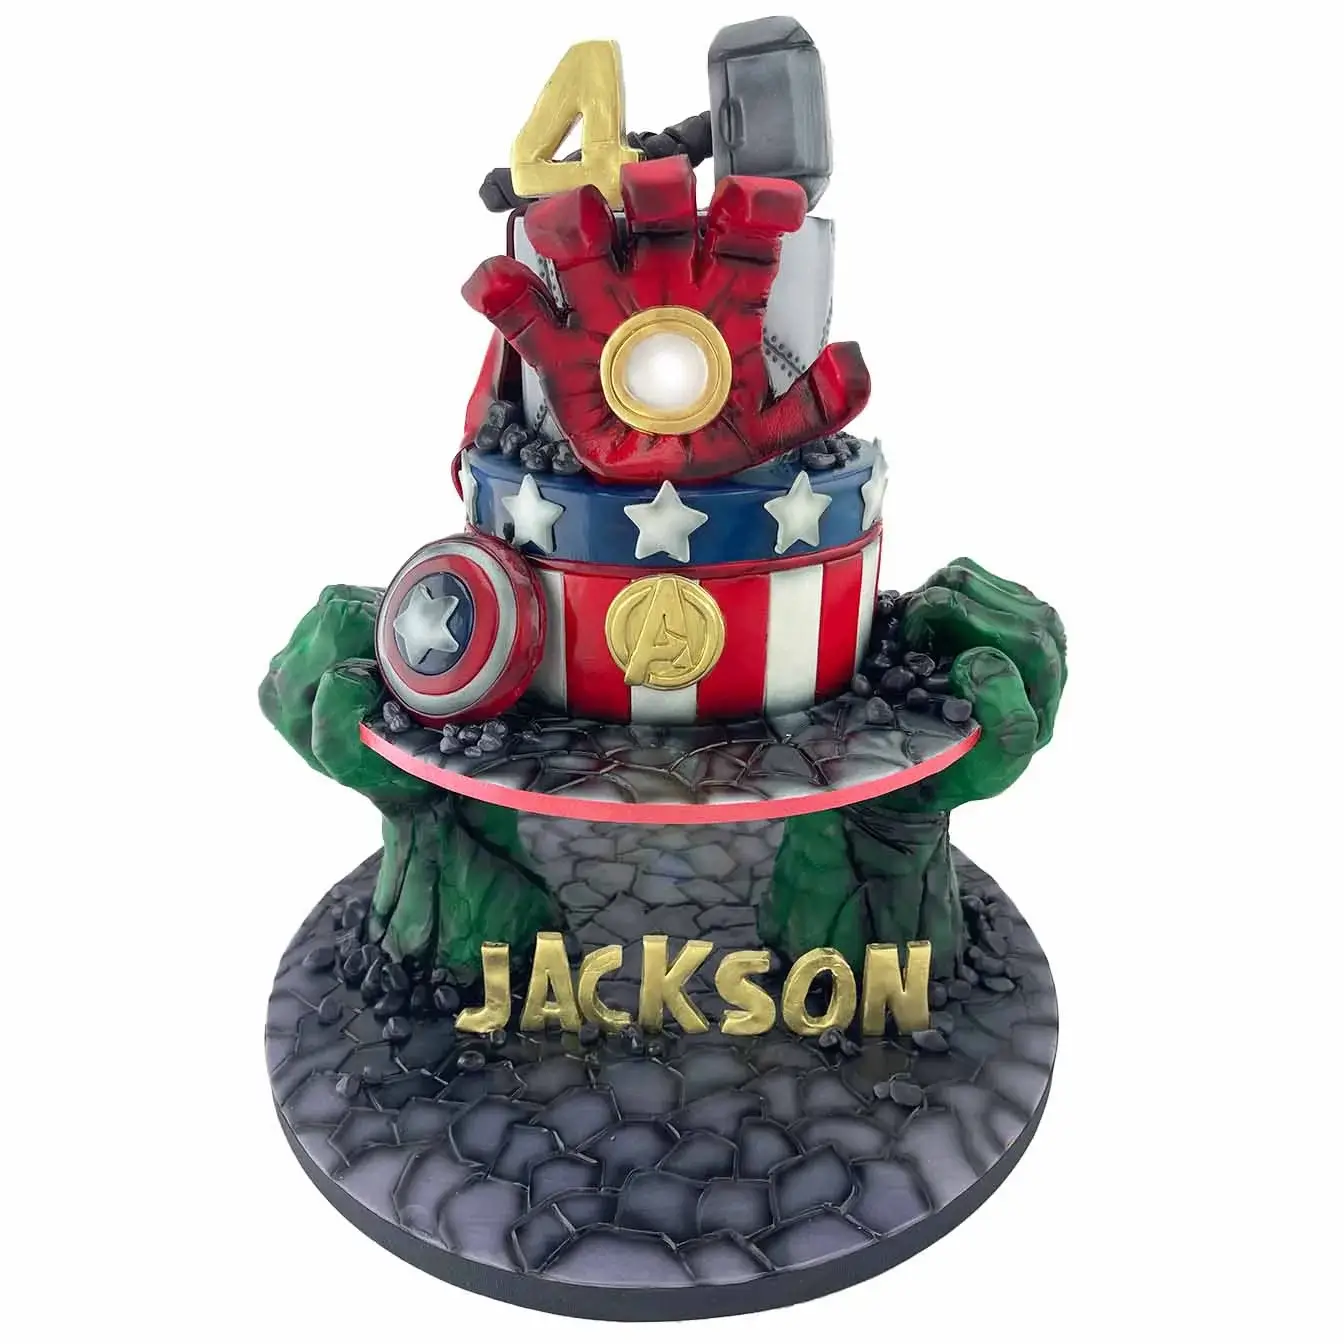 Avengers Assemble Floating Cake - A gravity-defying 2-tier cake held by Hulk's hands, featuring a light-up Iron Man hand, Avengers logo, Captain America's shield, and Thor's hammer, an epic centerpiece for superhero enthusiasts